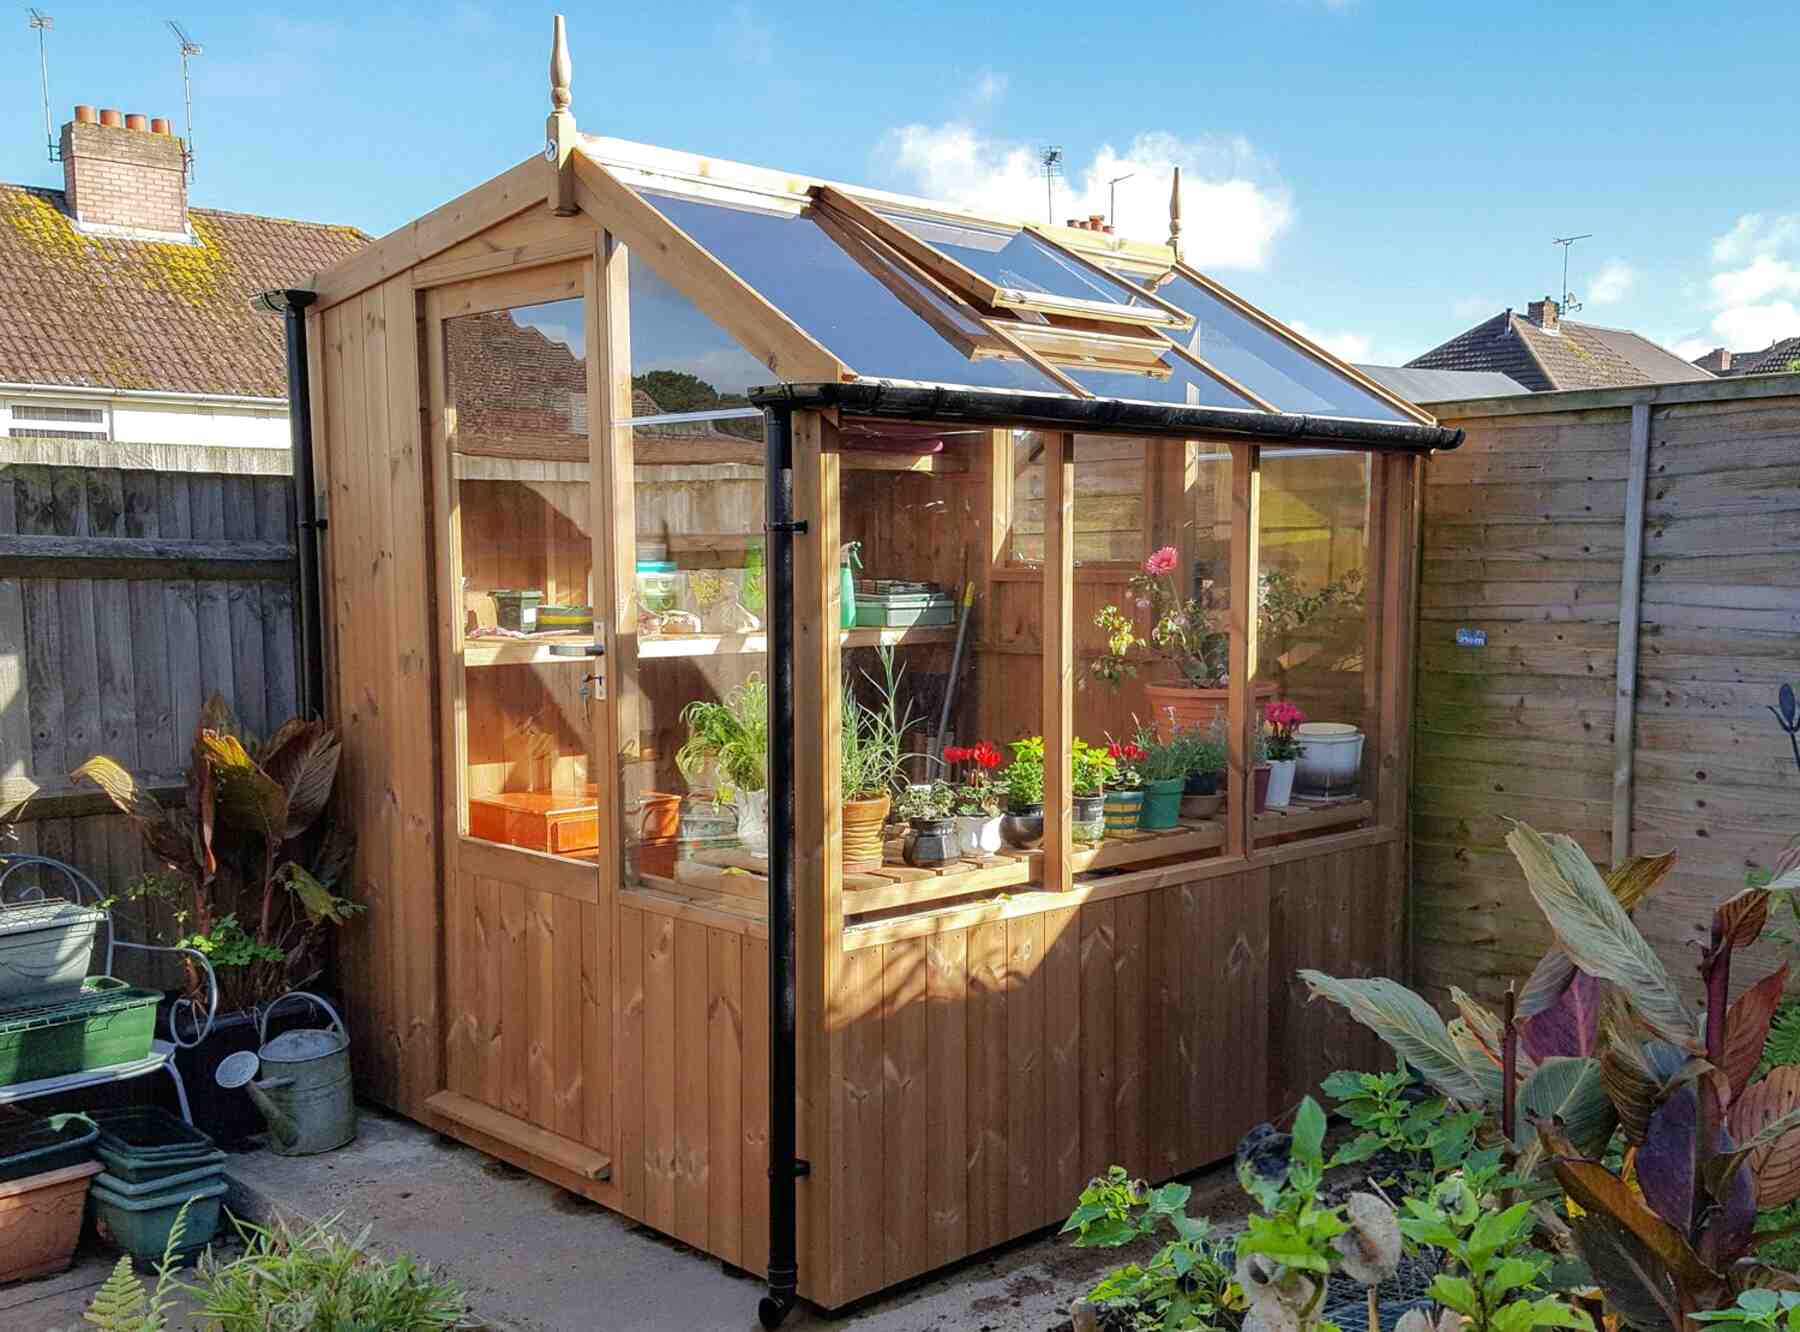 Shed Greenhouse for sale in UK - 54 used Shed Greenhouses